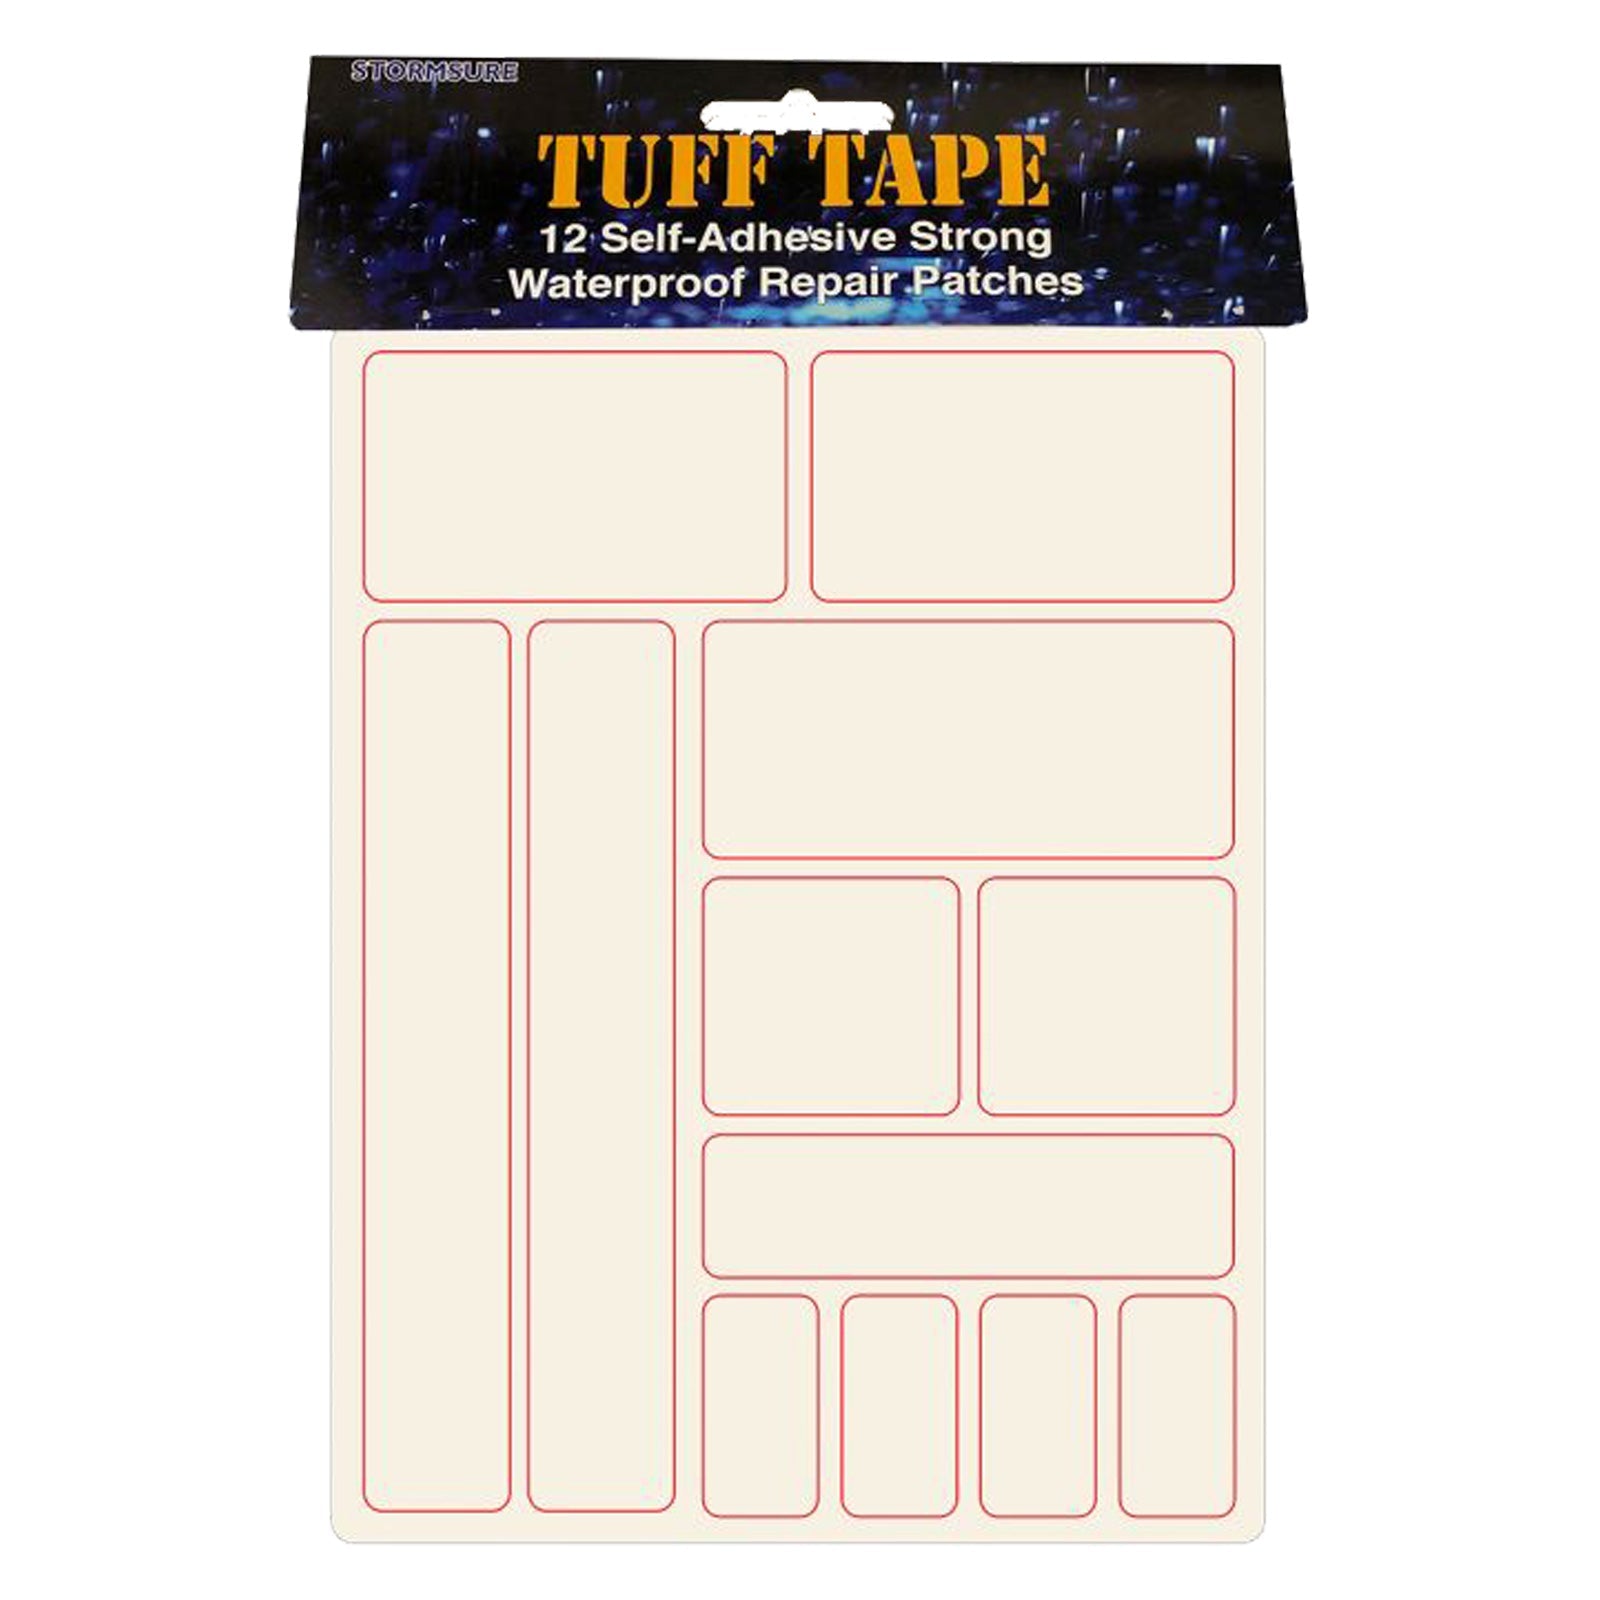 TUFF Tape Waterproof Repair Patch (12-Patches)